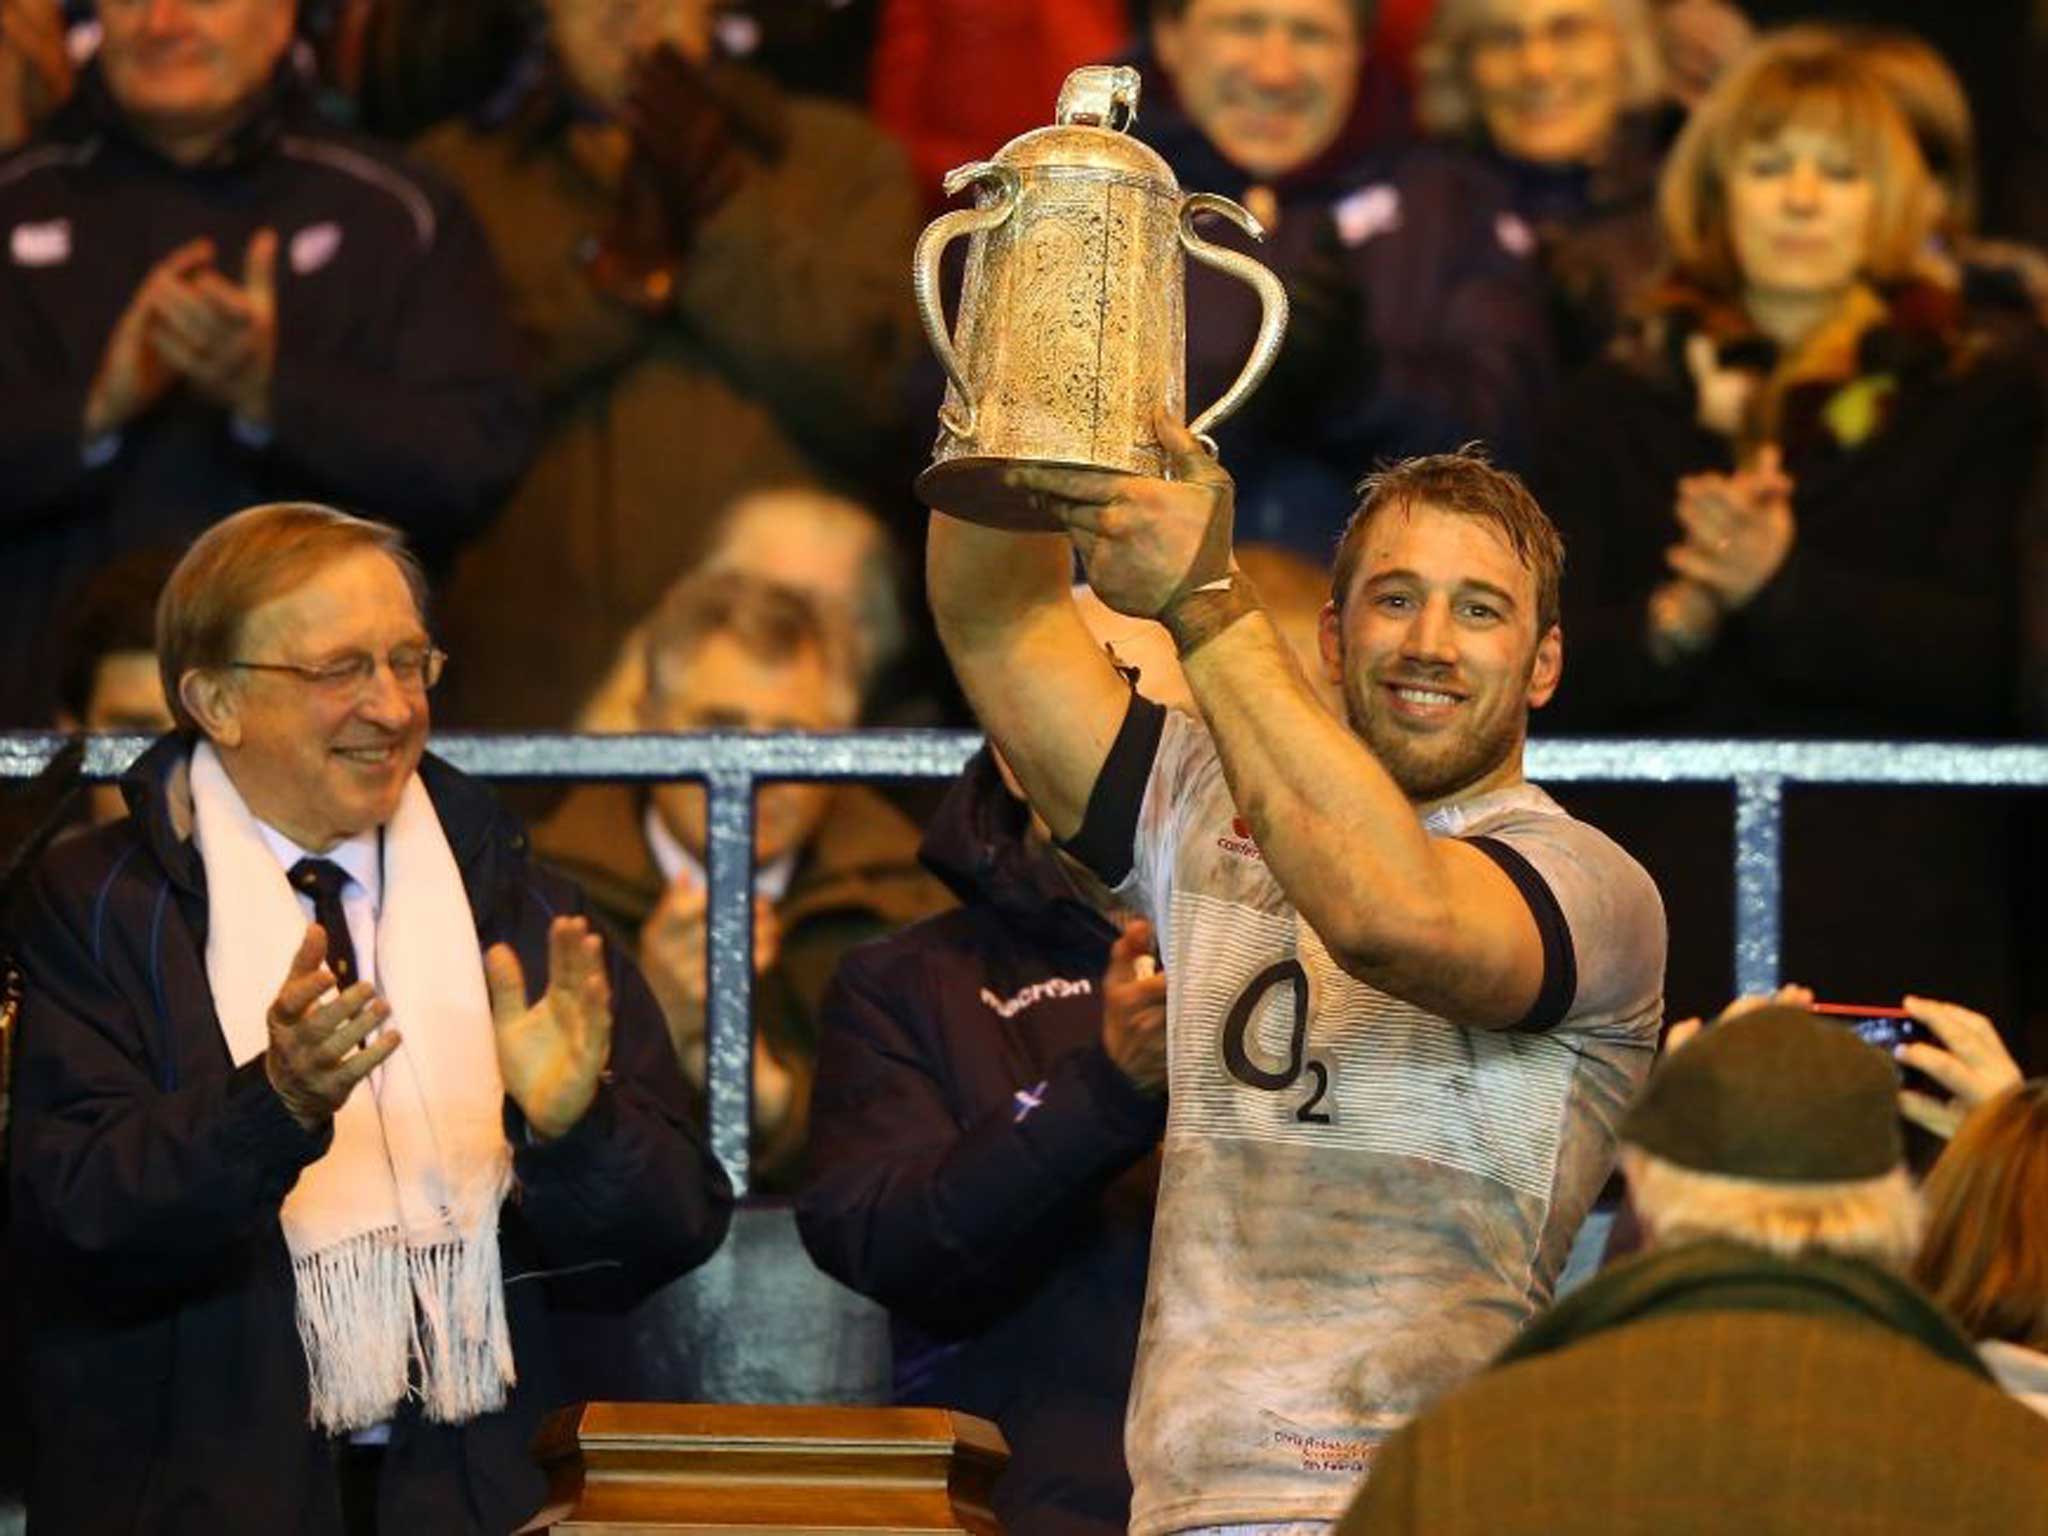 England Captain Chris Robshaw lifts the cup